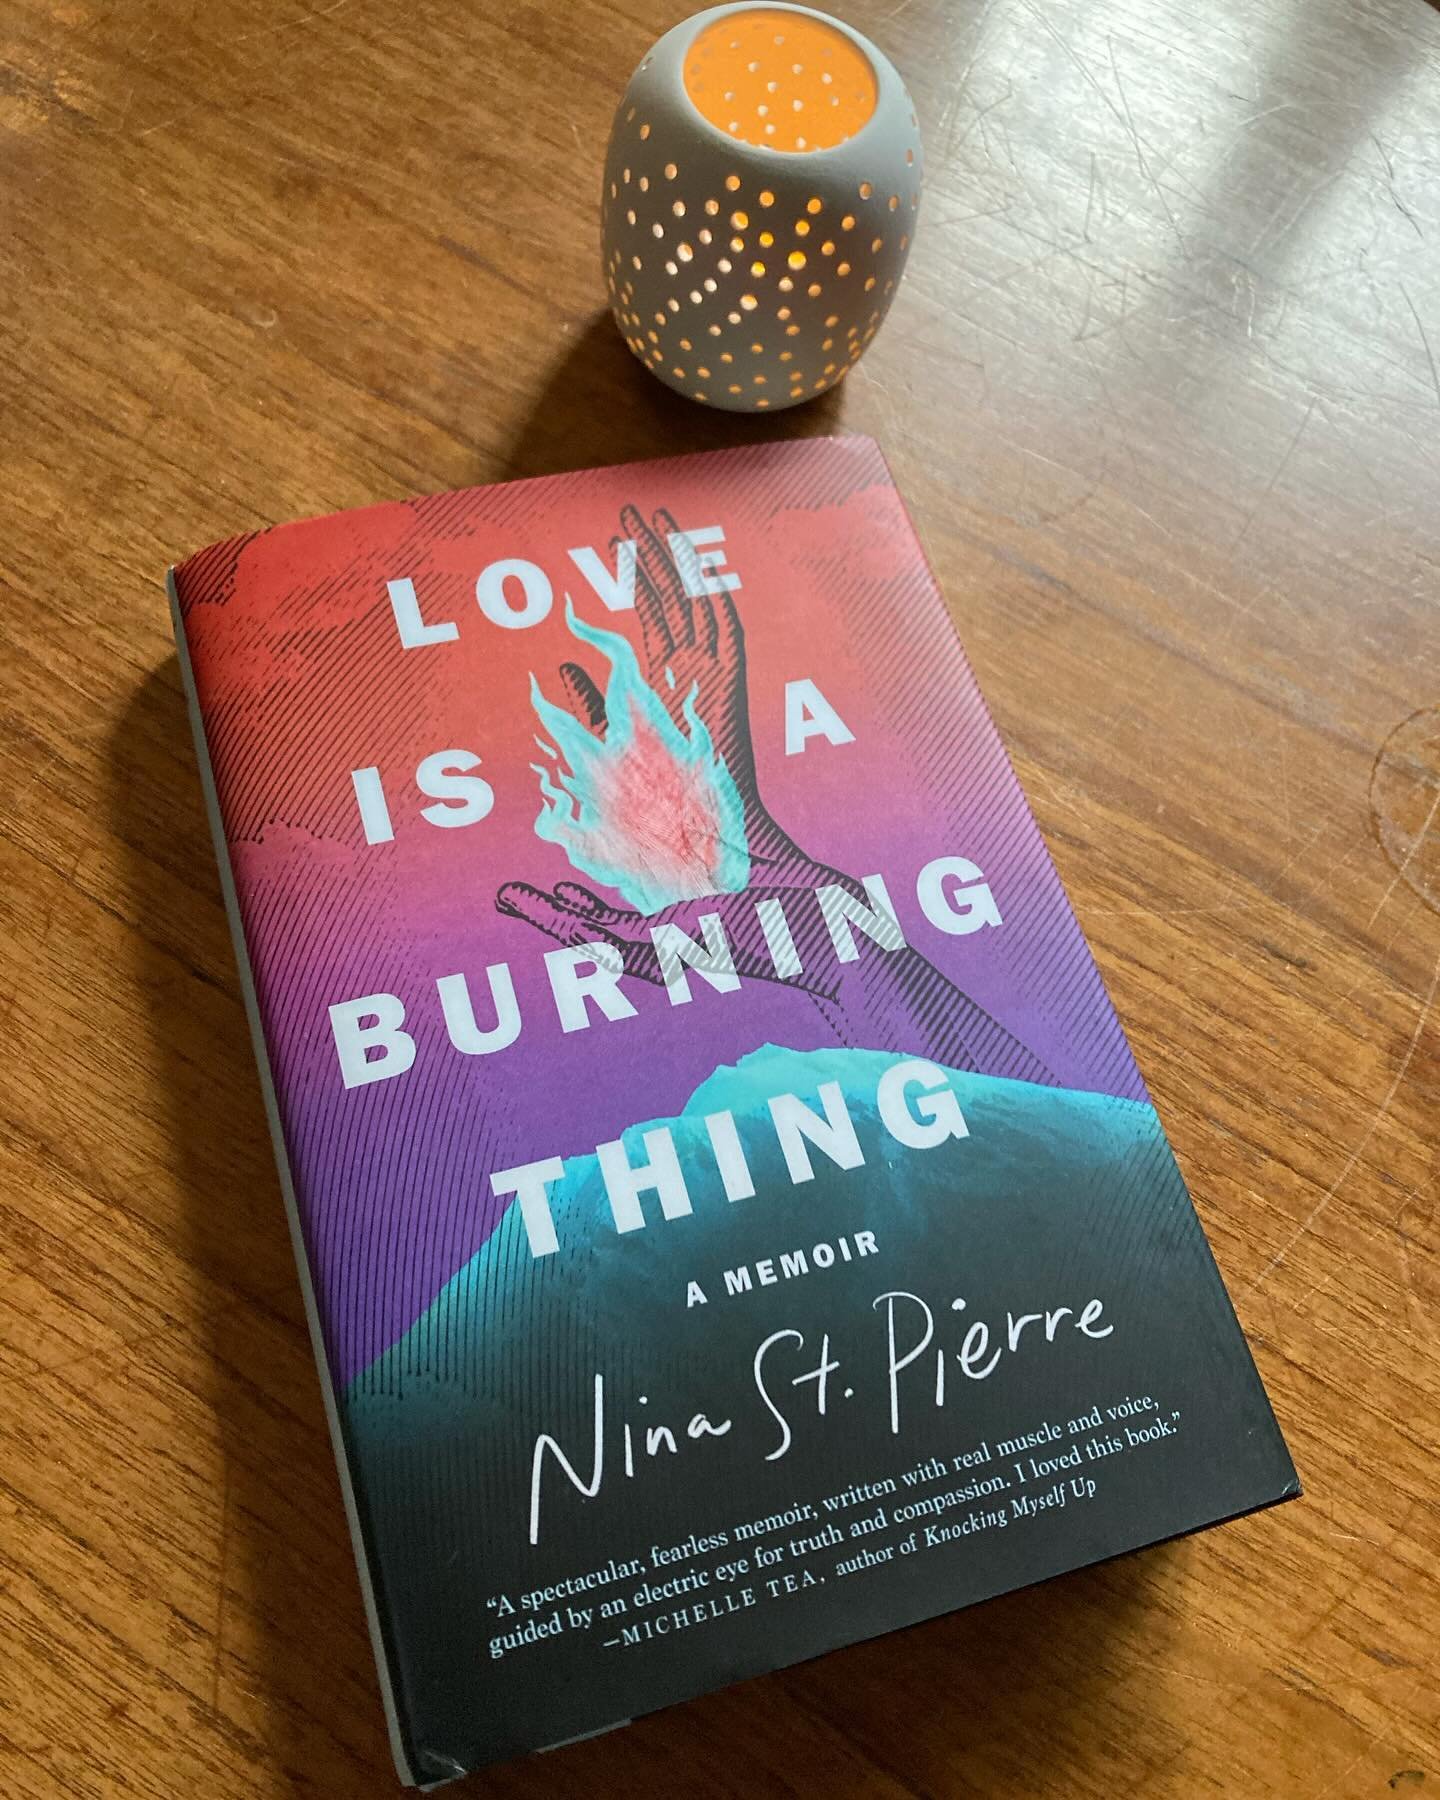 It&rsquo;s here, it&rsquo;s here! LOVE IS A BURNING THING by @ninastpierre is a tour de force and officially out Tuesday, May 7th. I was lucky enough to get an early copy and couldn&rsquo;t stop hugging it.

When your writer-sister, sister-sister, ri